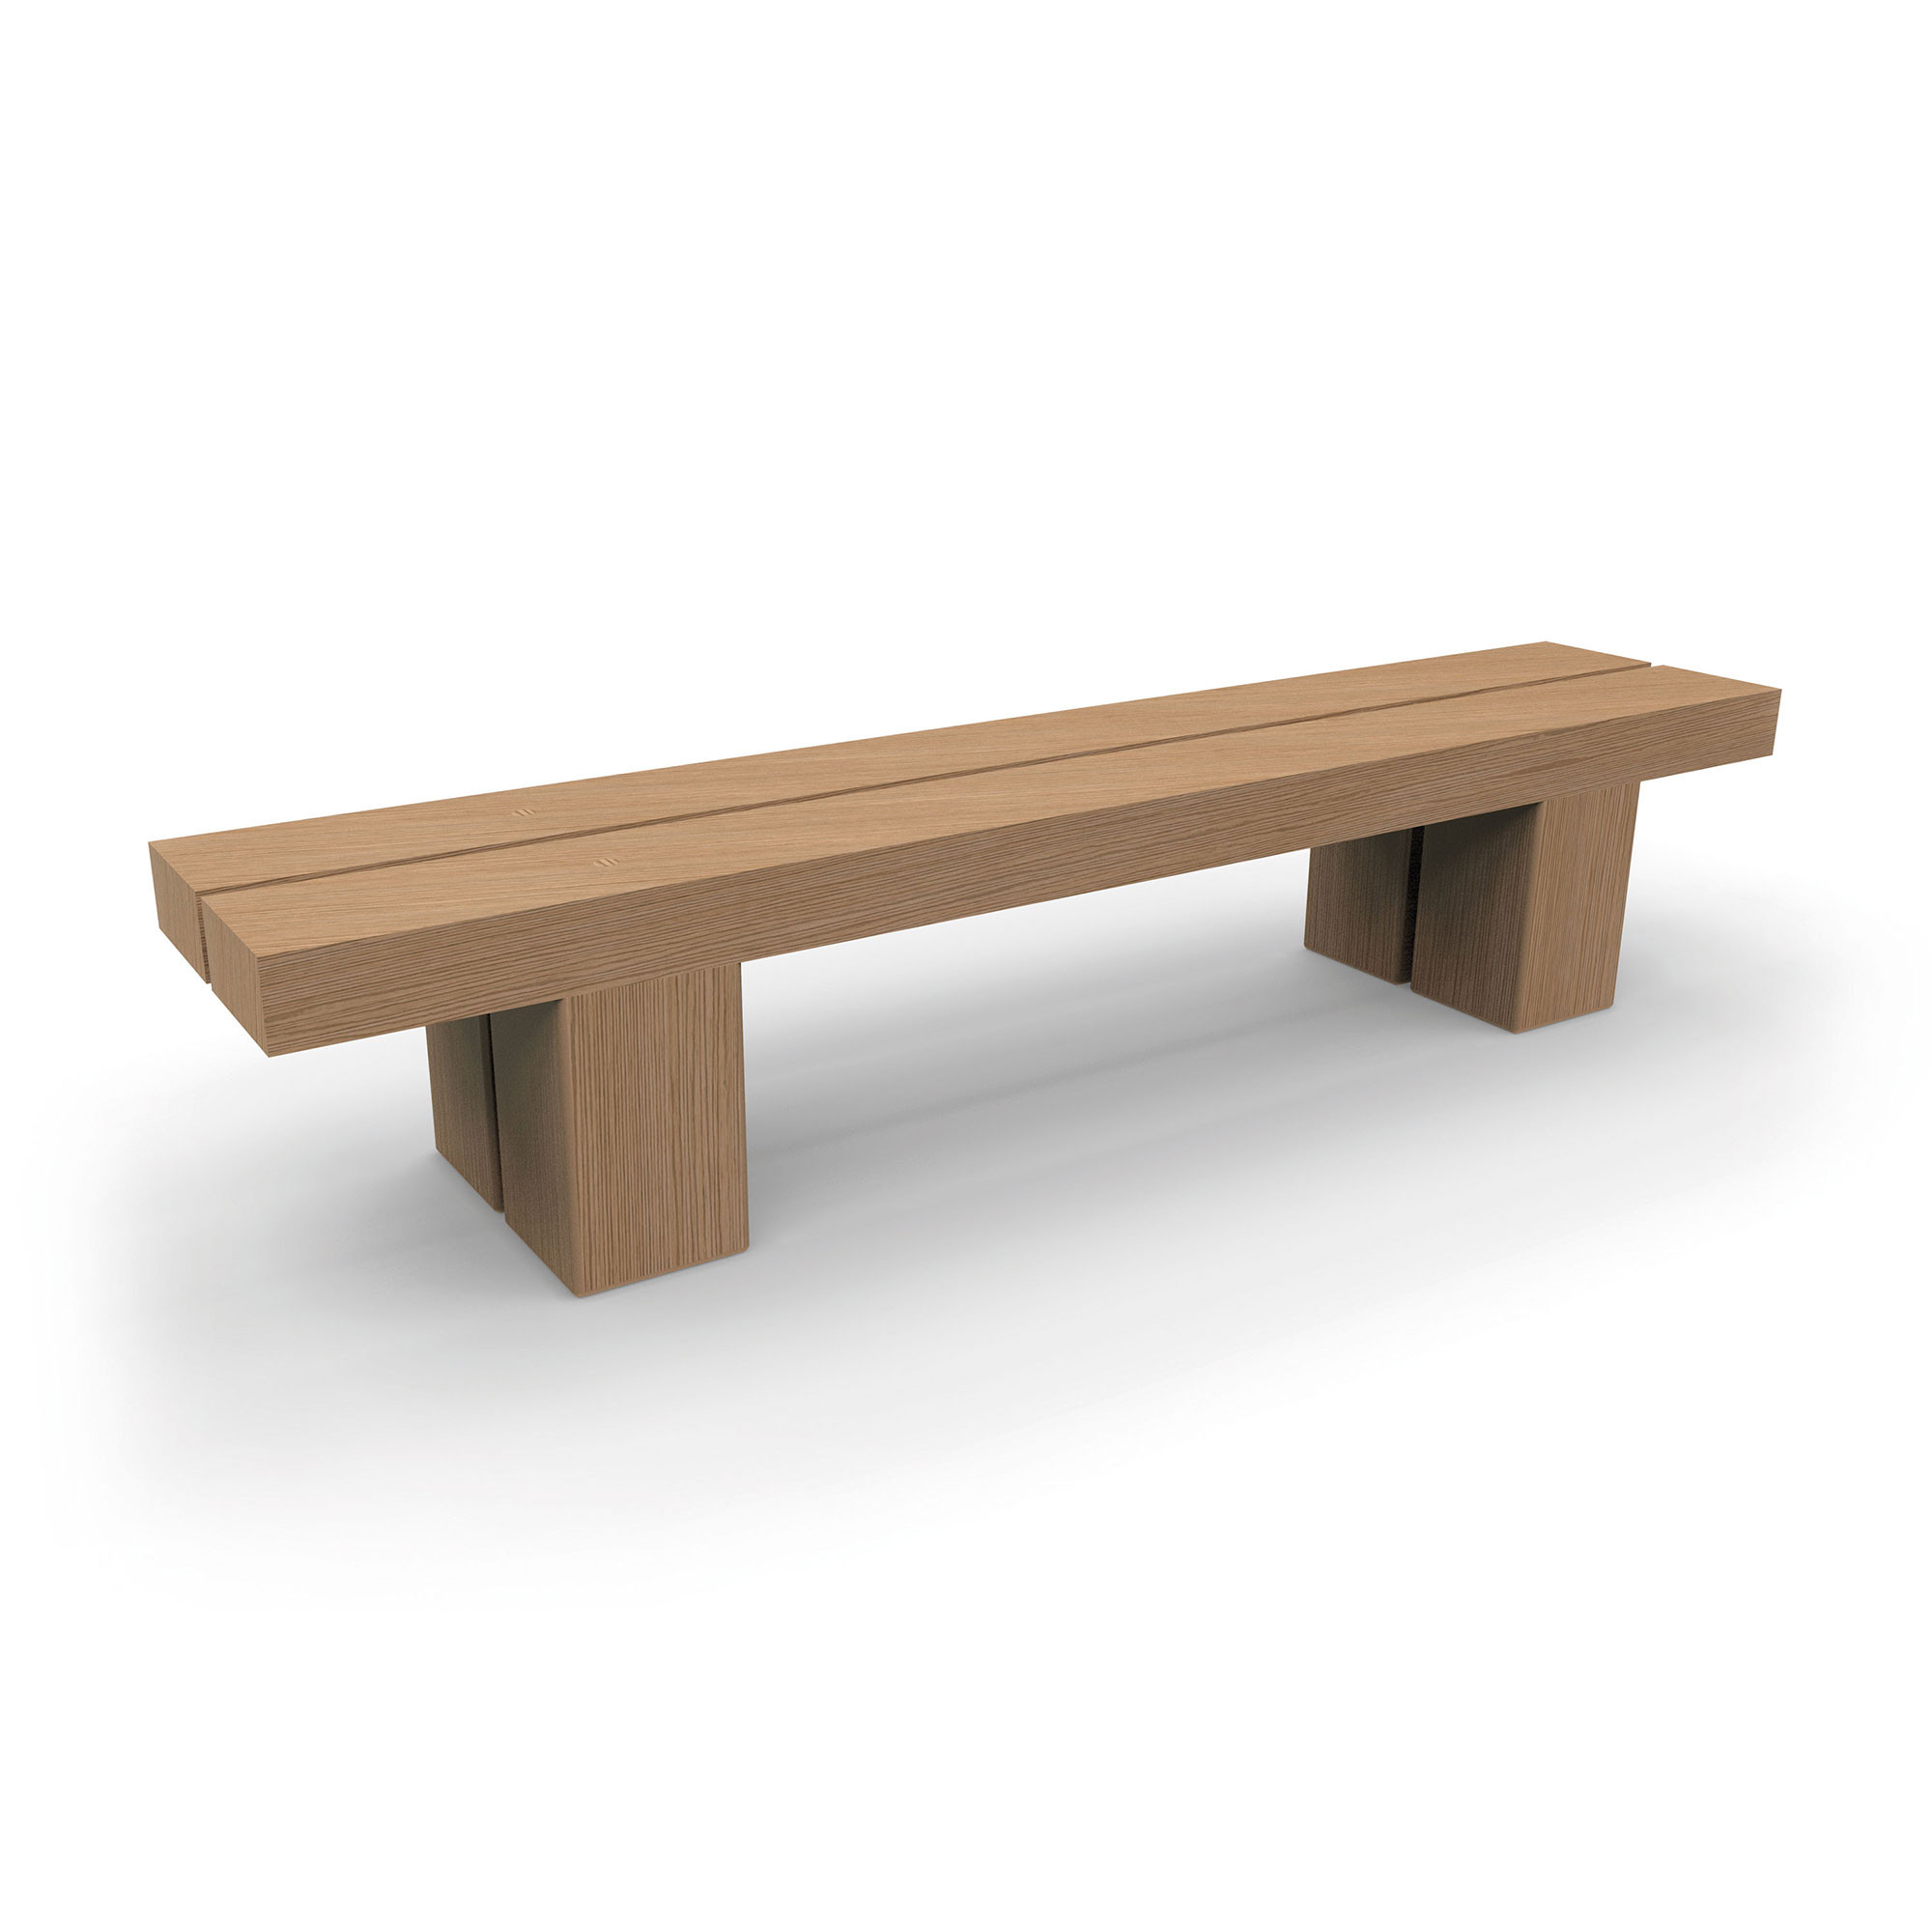 Type 2 Backless Bench